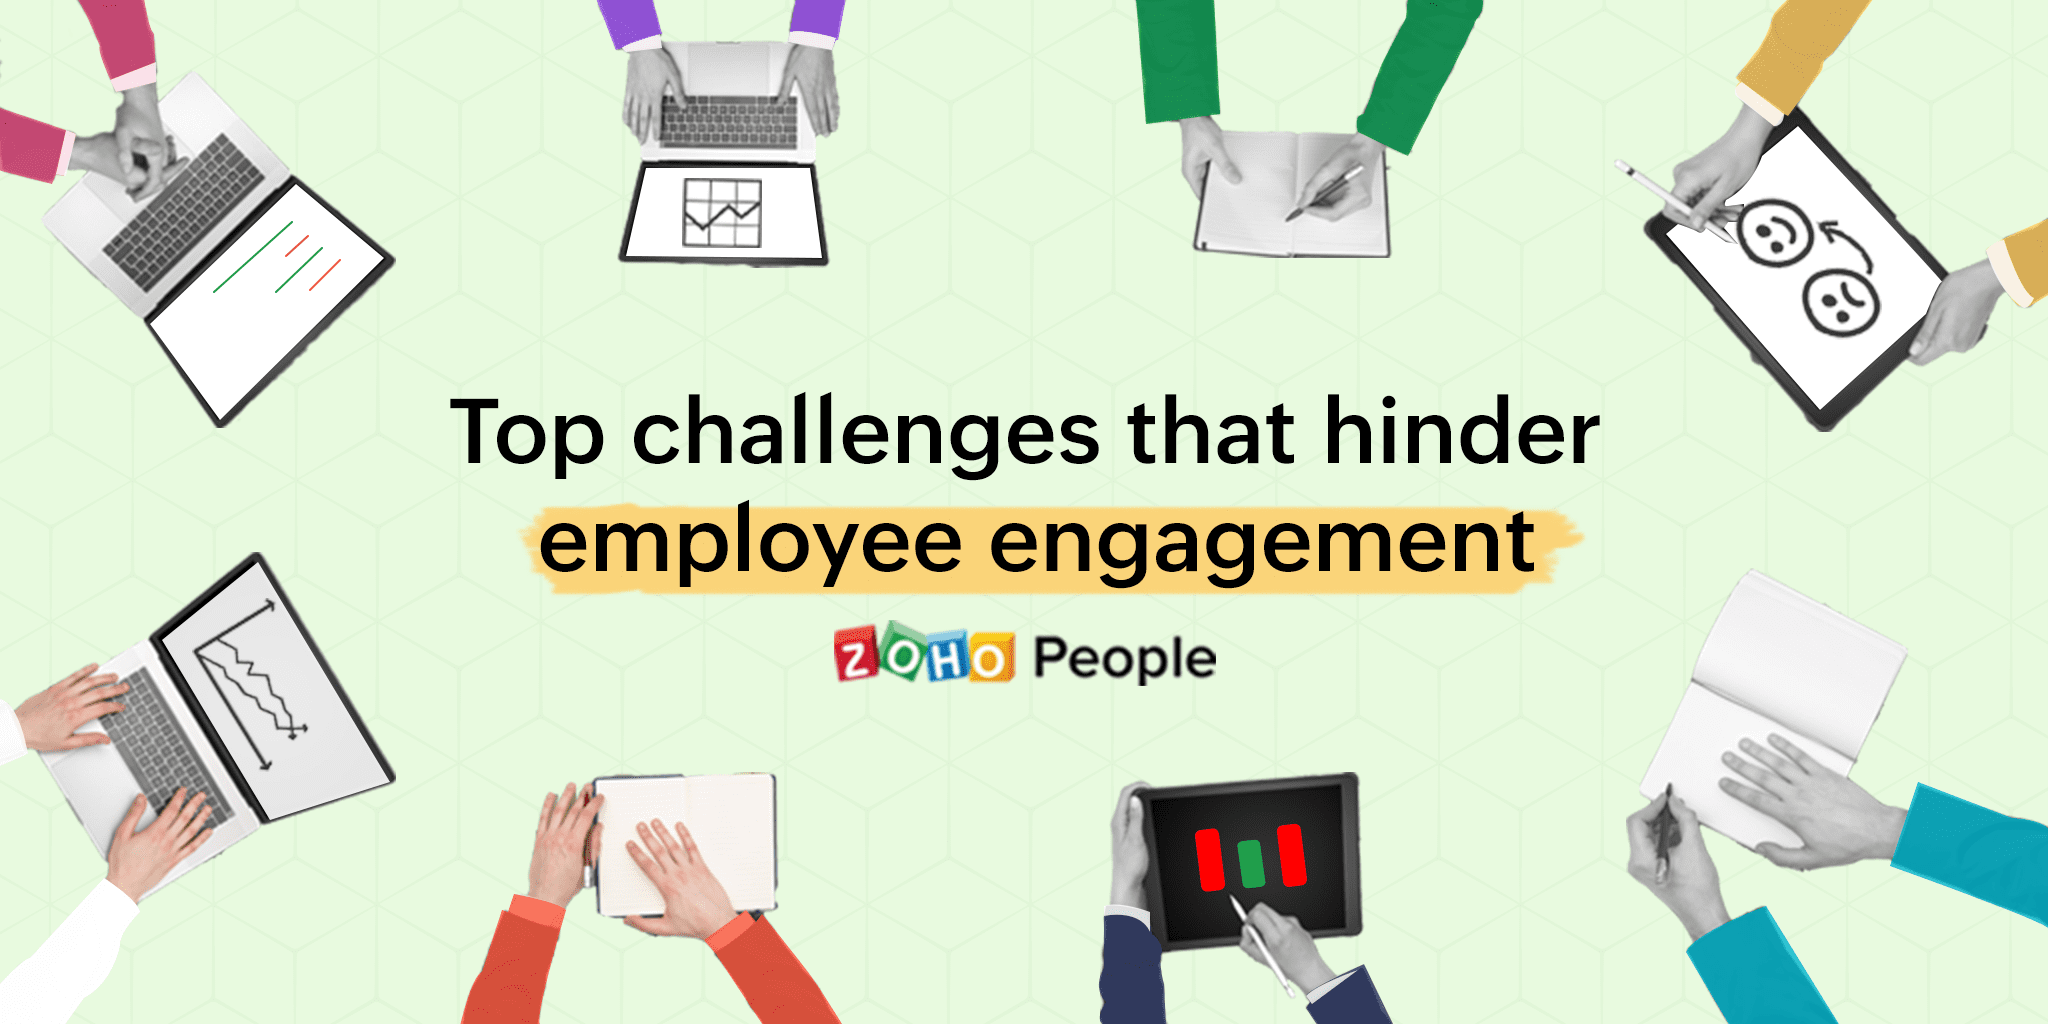 Top challenges that hinder employee engagement